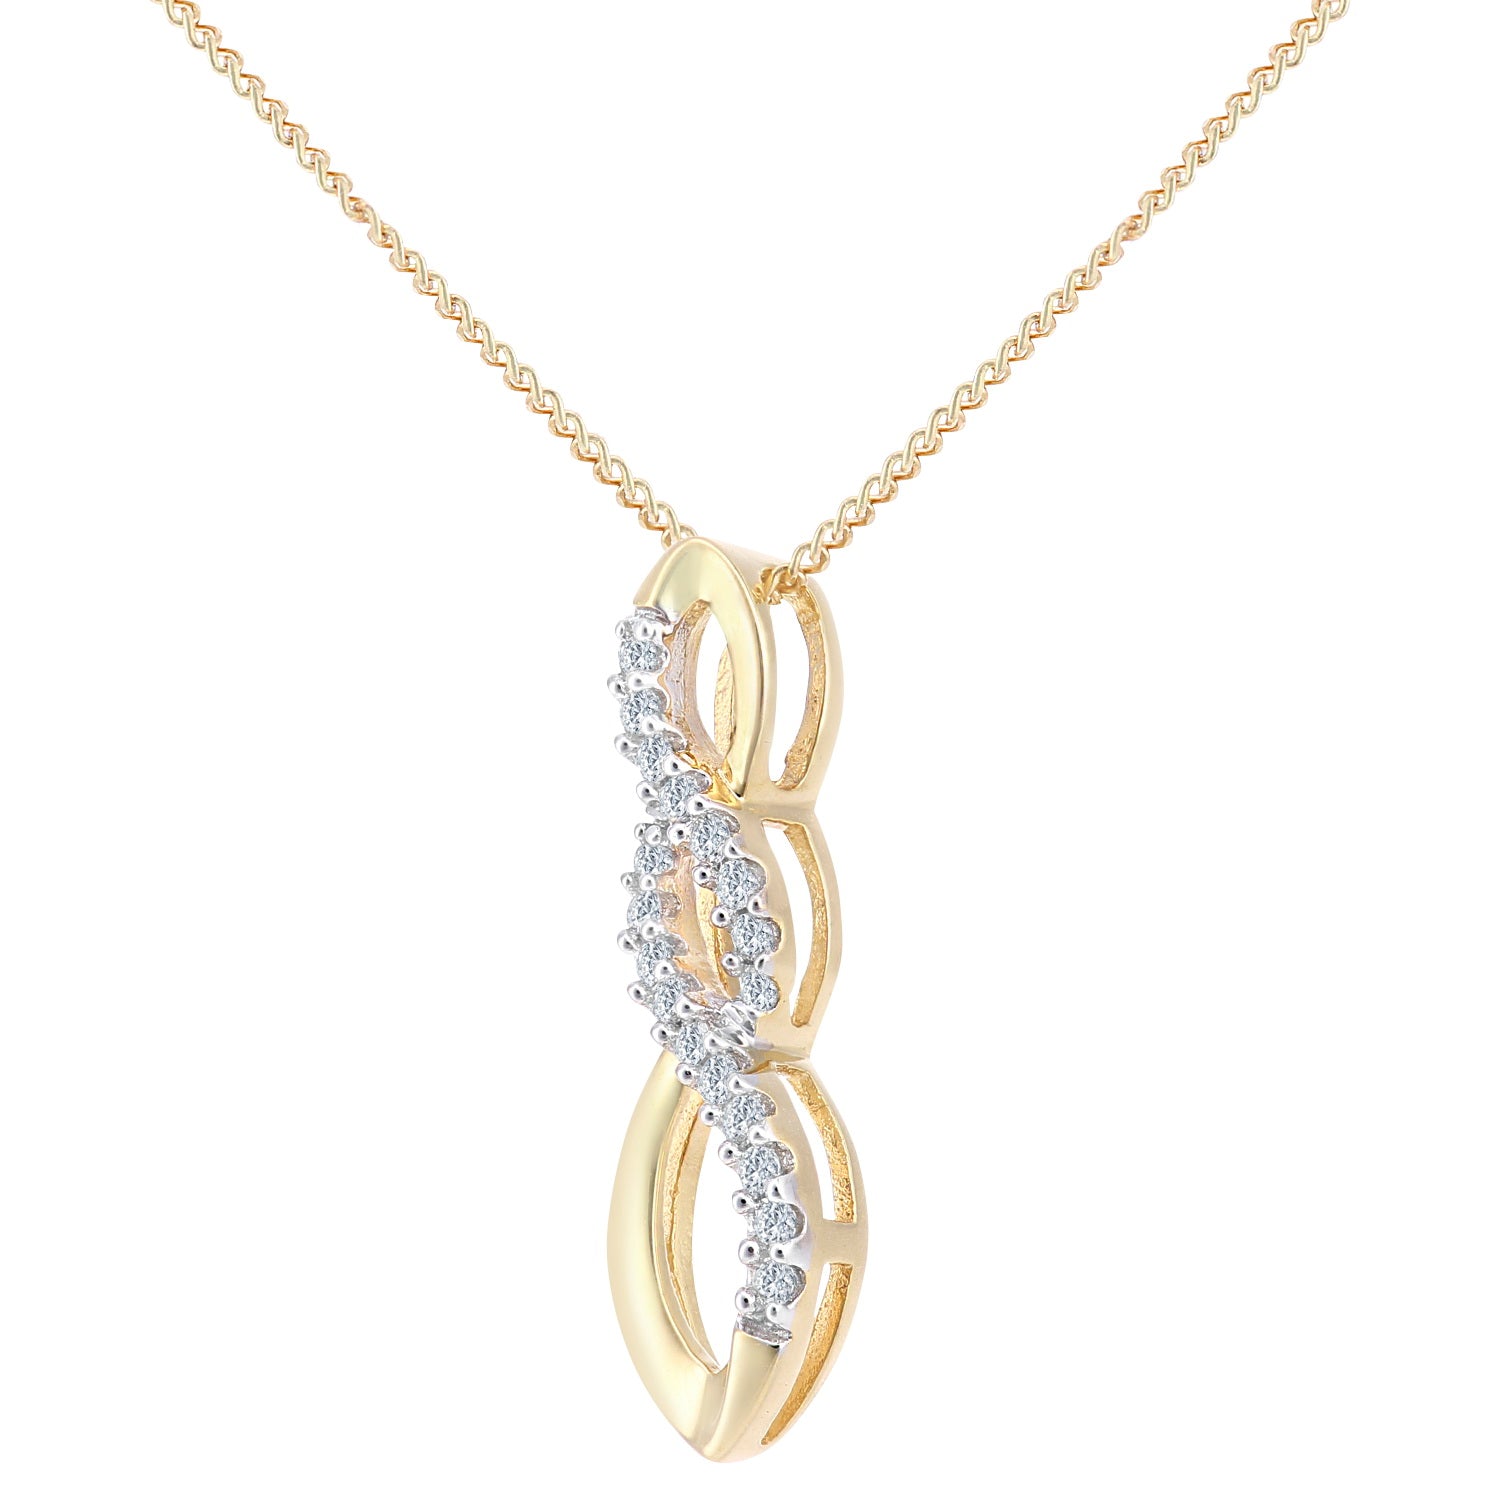 18ct Gold  Round 8pts Diamond Infinity Pendant Necklace 18 inch - PP0AXL5937Y18